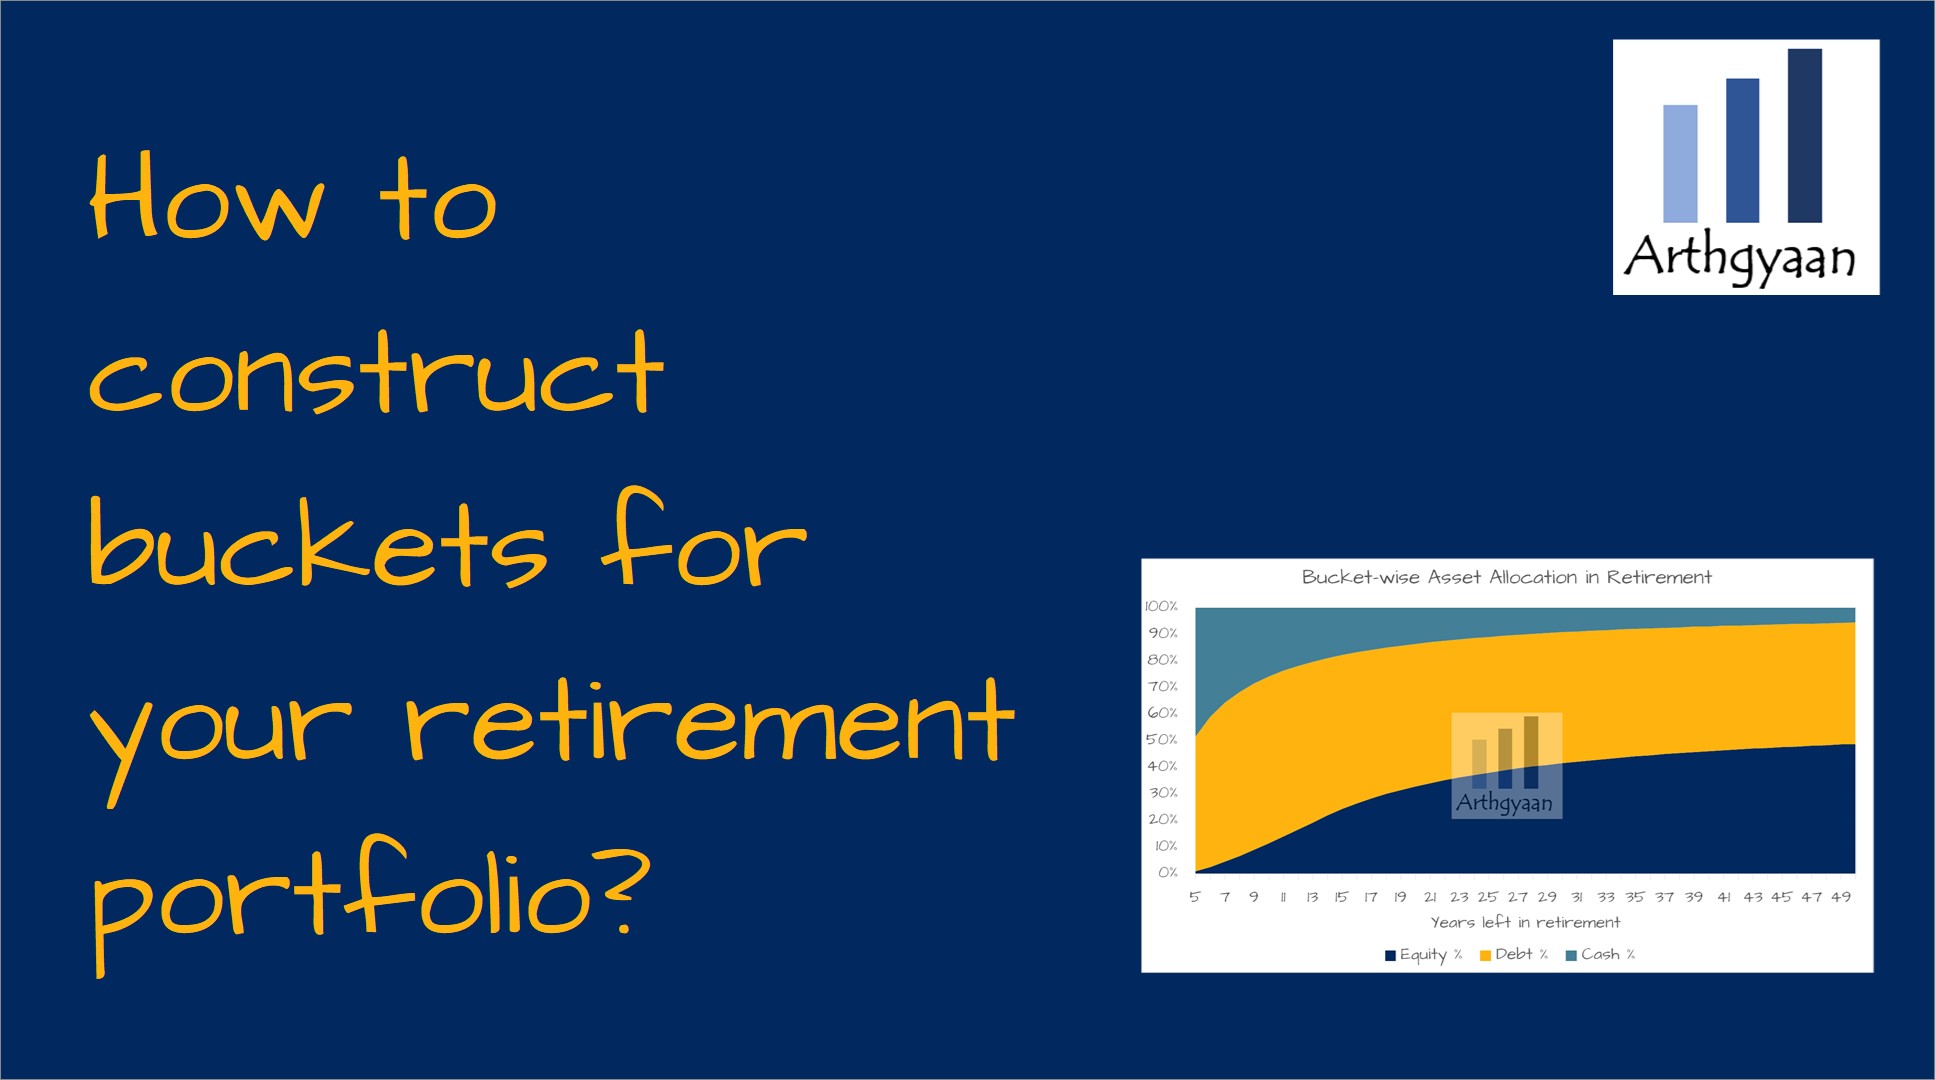 How to construct buckets for your retirement portfolio?